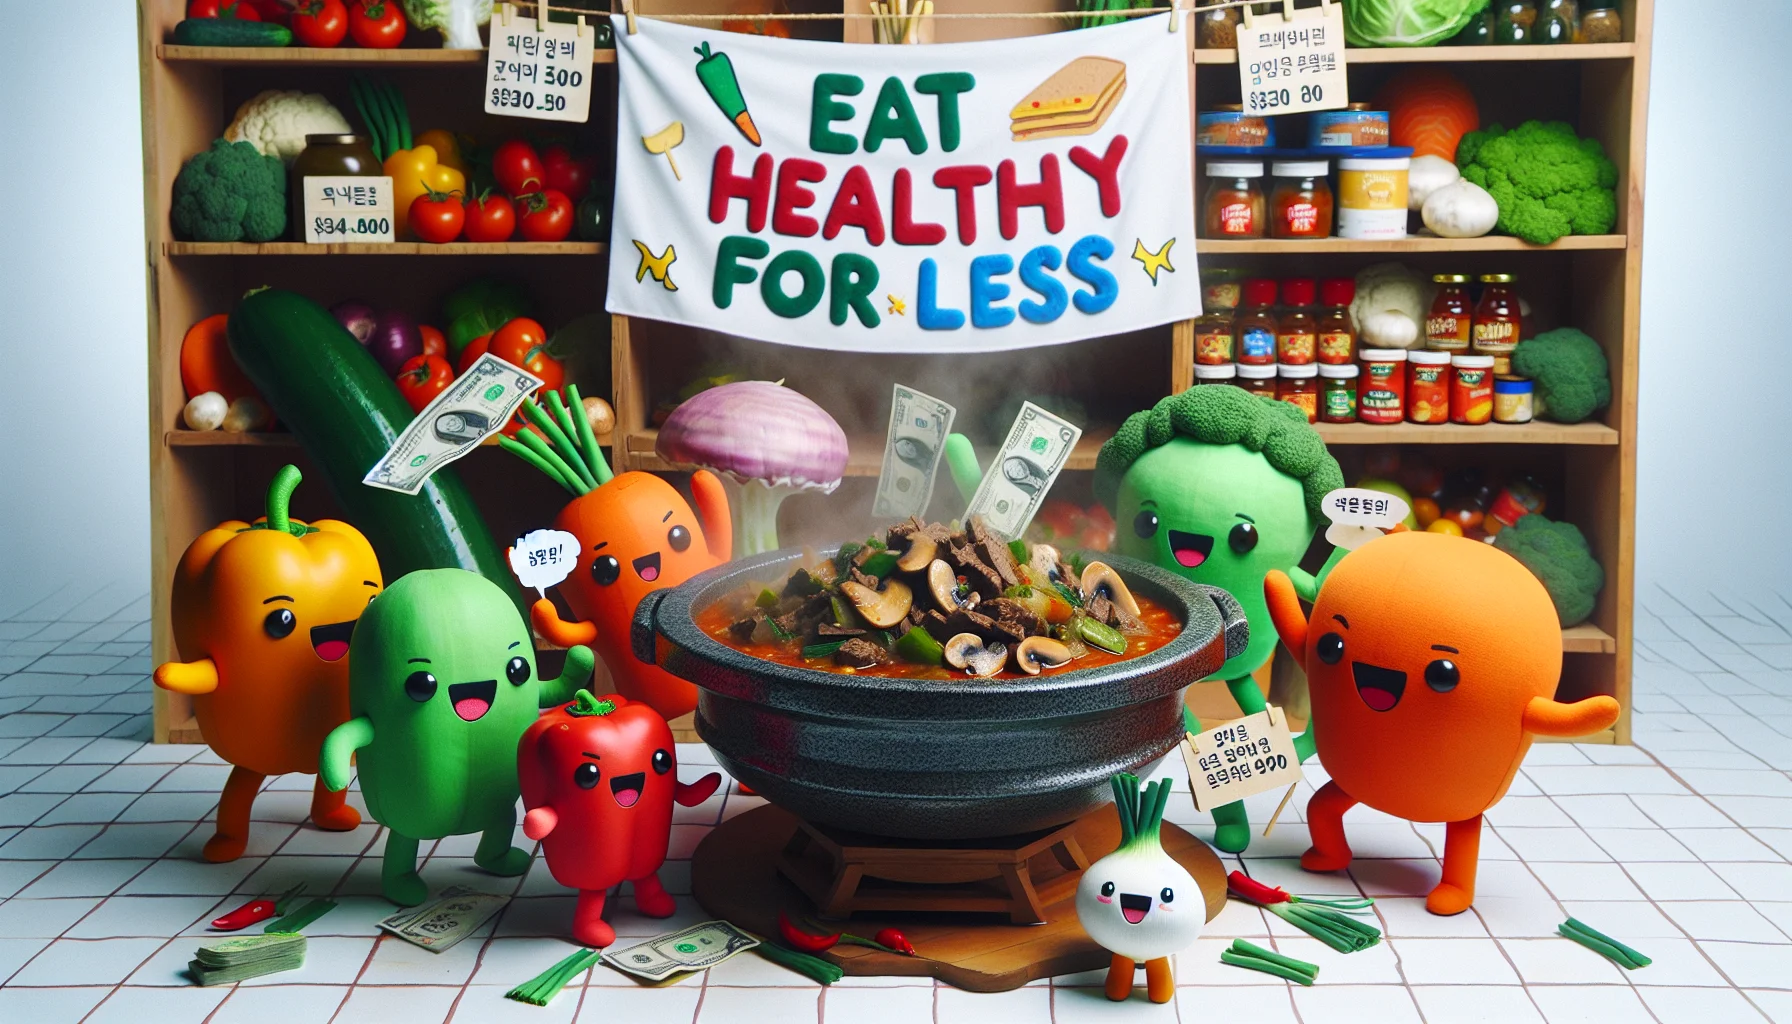 Imagine a humorous tableau revolving around a Korean beef stew recipe. The scene presents a steaming bowl of stew, with tender pieces of beef, mushrooms, green onions, and red chili peppers cooked to perfection and served in a traditional Korean stone pot. Advancing towards the stew are cute anthropomorphic vegetables and wallet characters, laughing and cheering. They carry banners emblazoned with slogans encouraging healthy eating and budget-friendly solutions. The backdrop consists of shelves filled with various affordable and healthy ingredients, all beneath a bright homemade banner that says 'Eat Healthy for Less'.